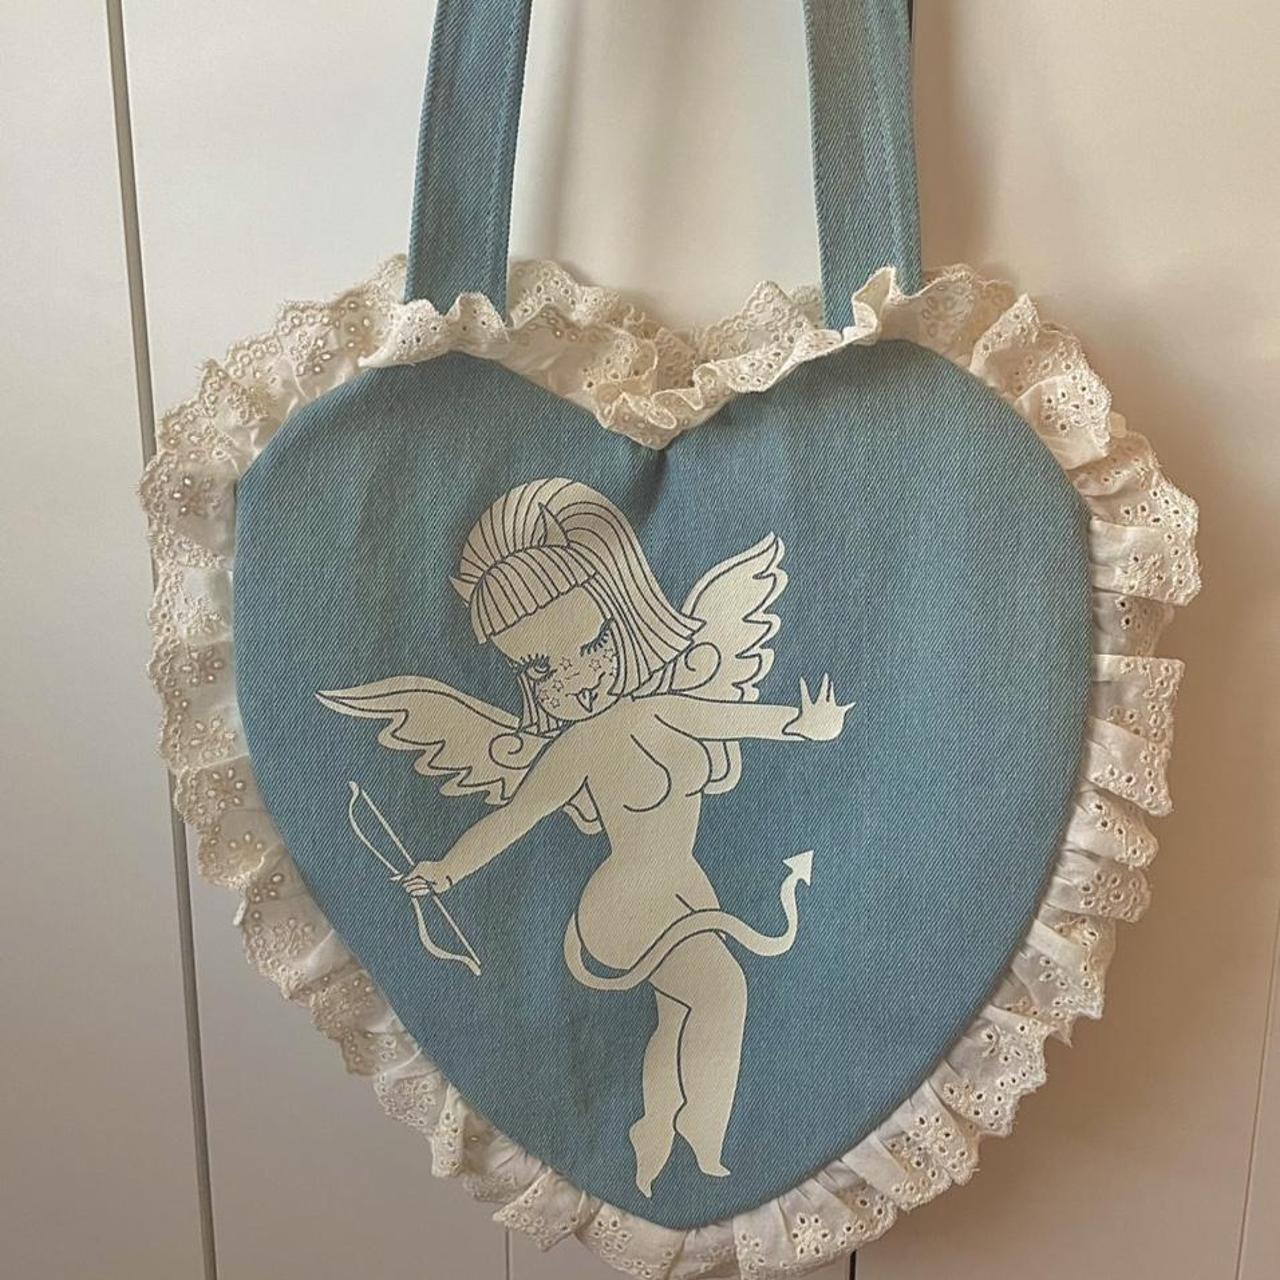 Valfre Women's Blue and White Bag